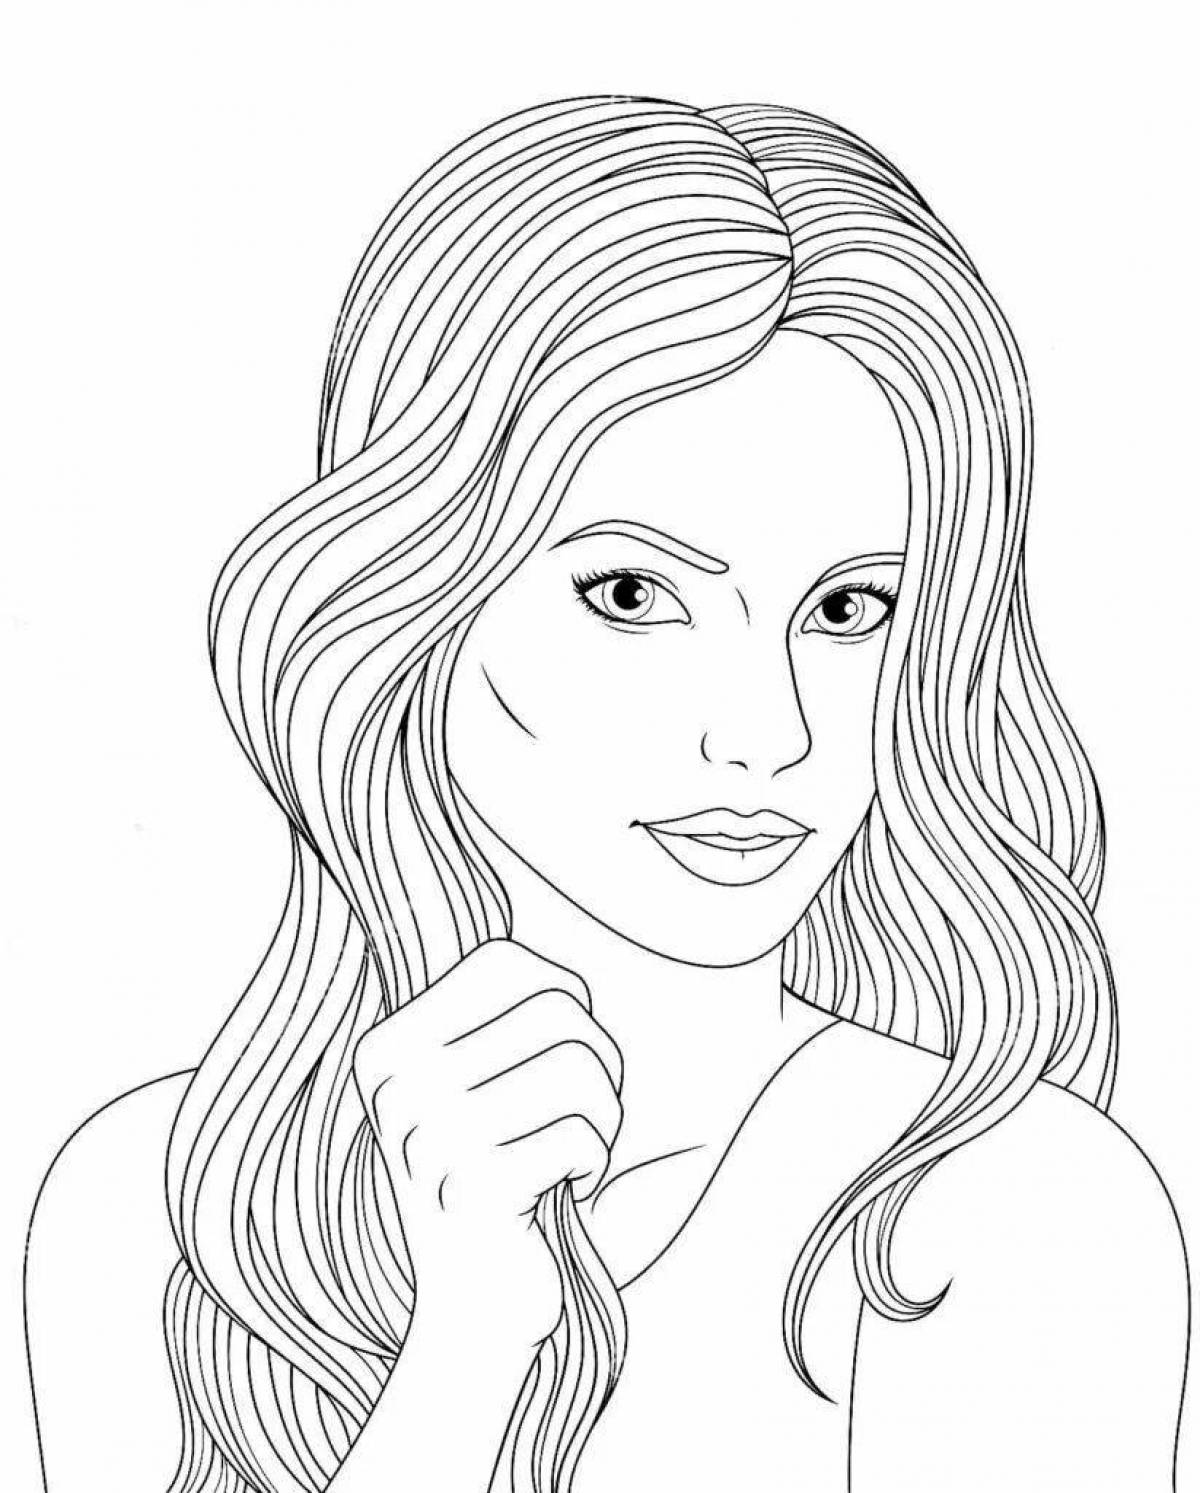 Adorable makeup coloring page for girls